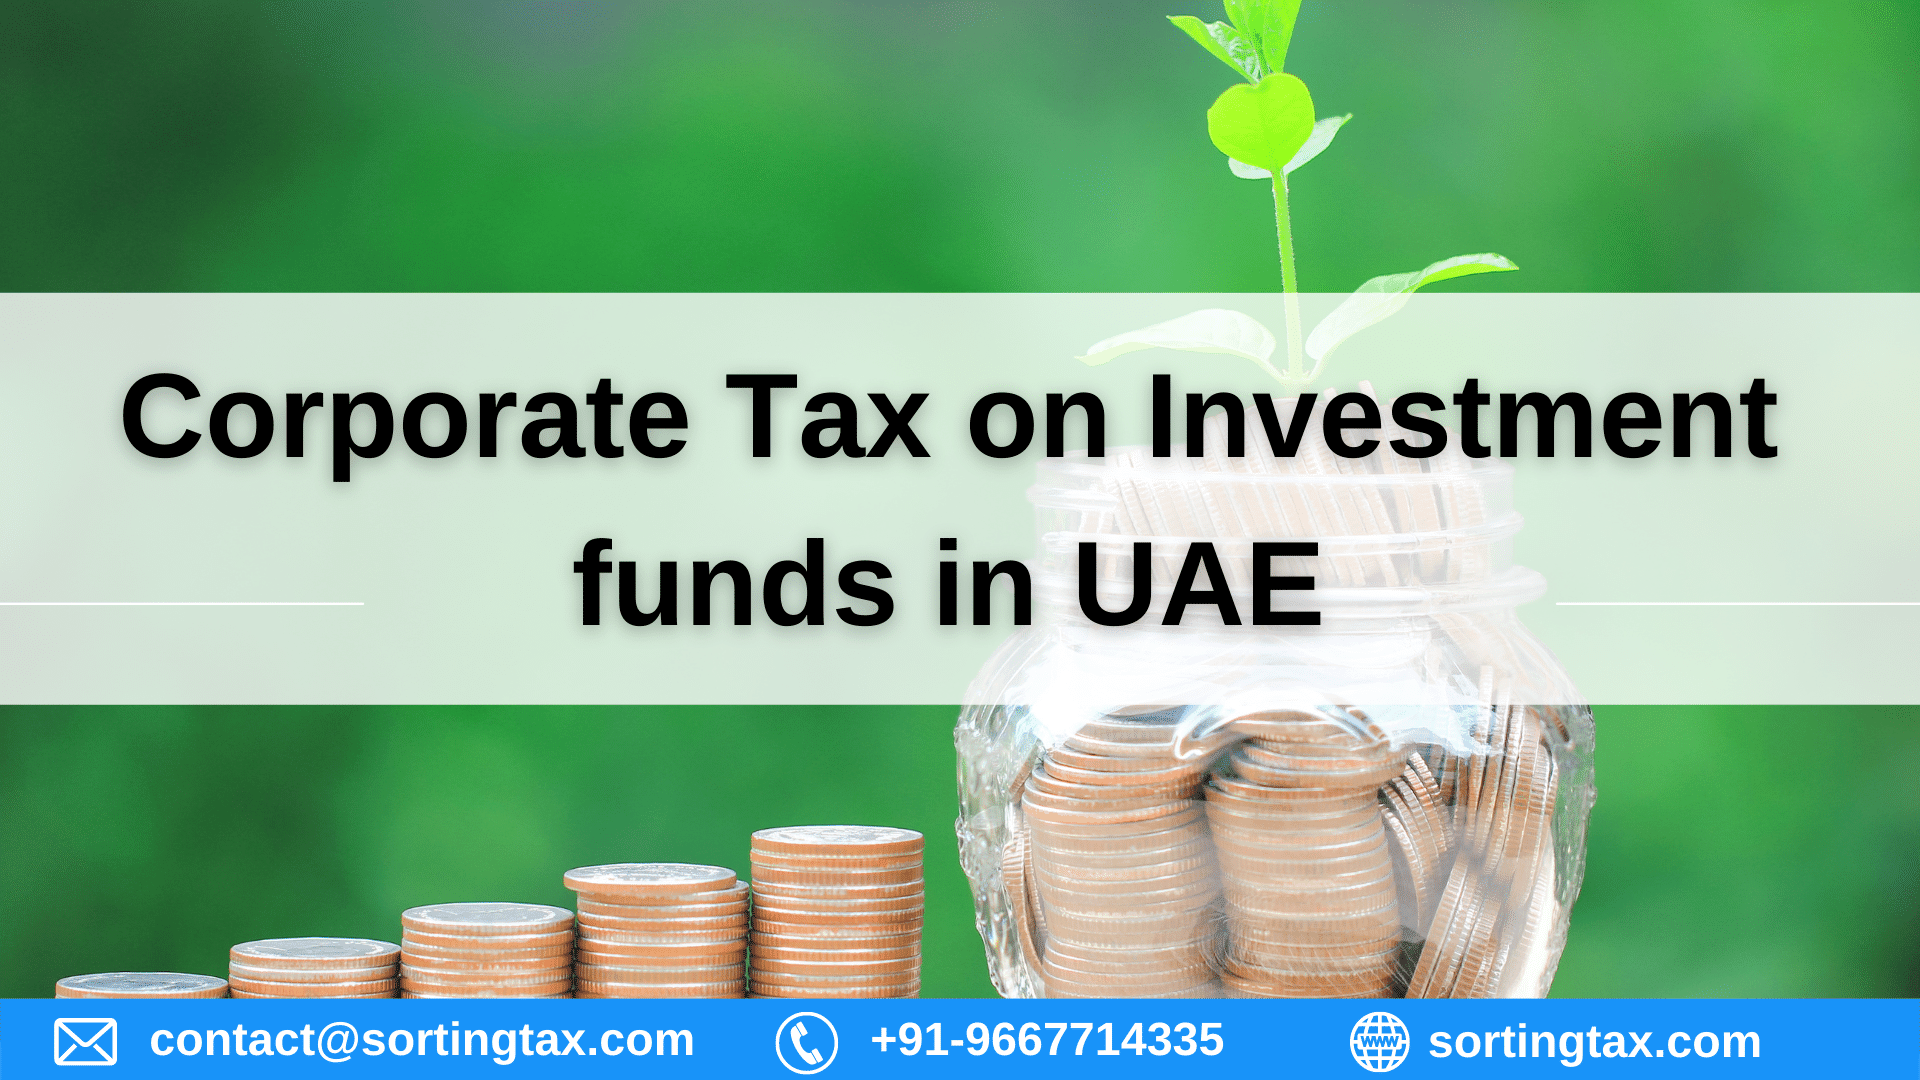 Corporate Tax on Investment funds in UAE